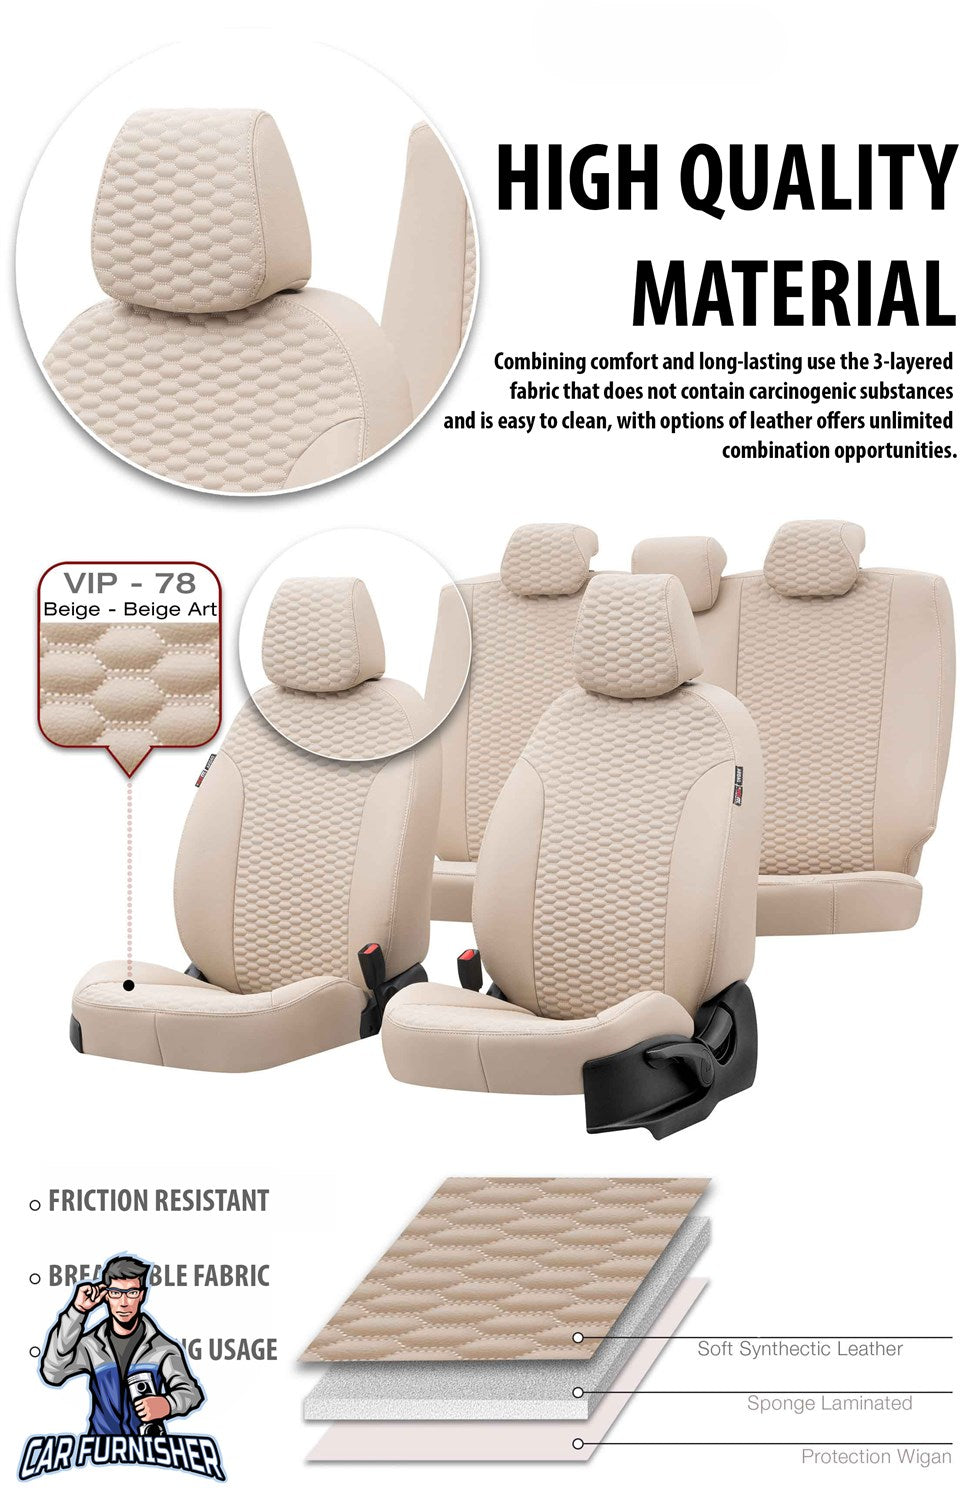 Honda Civic Seat Covers Tokyo Leather Design Ivory Leather